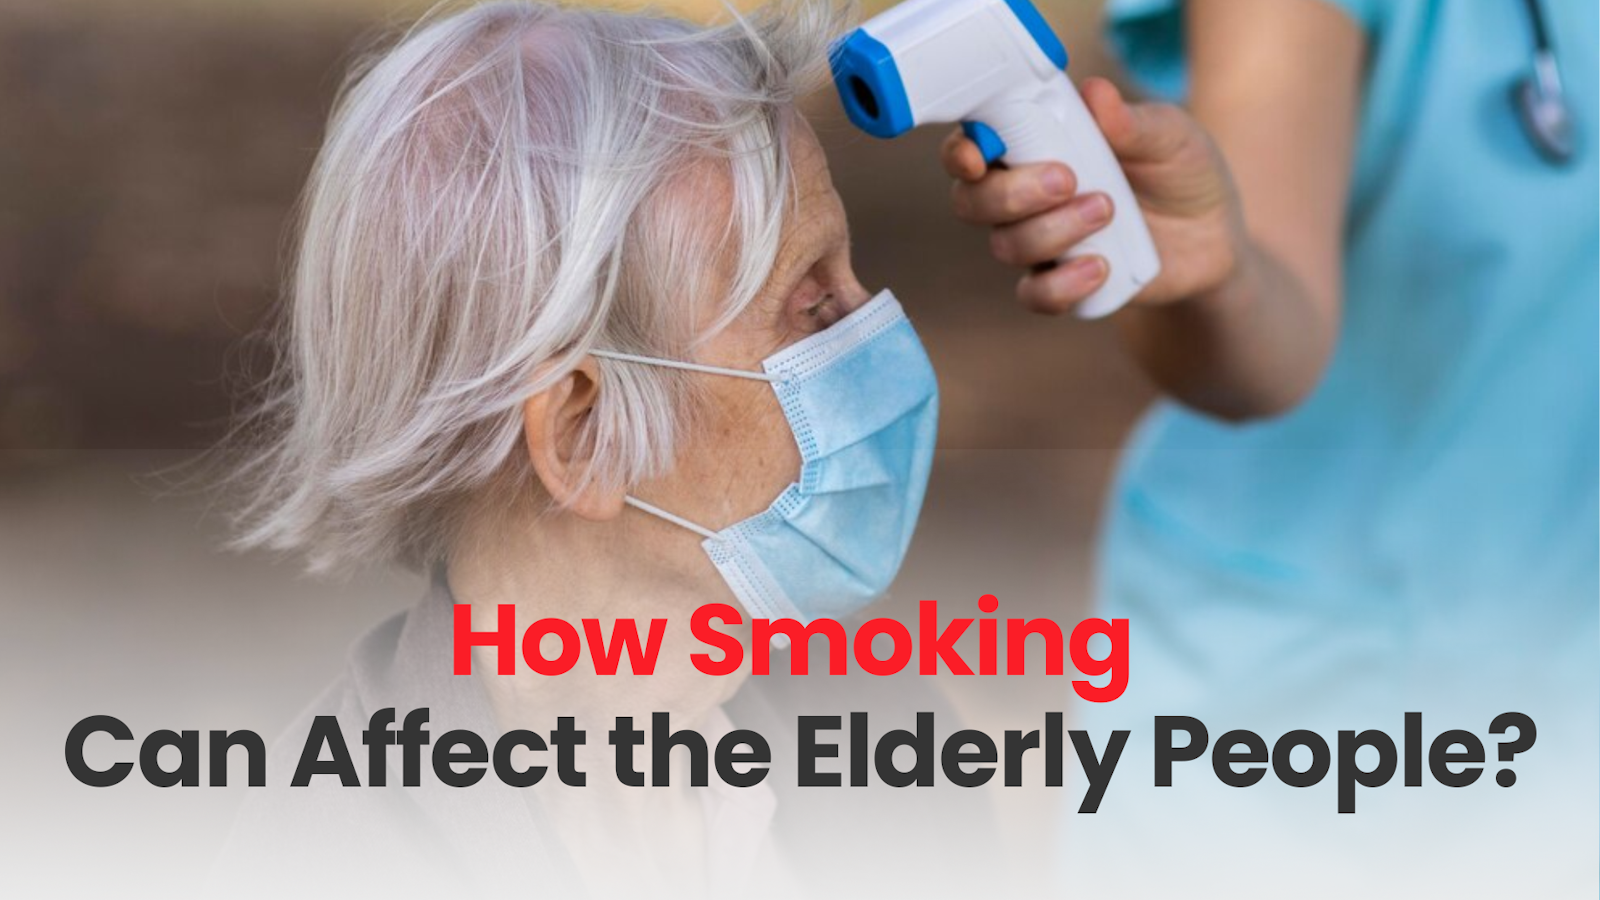 How Smoking Can Affect the Elderly People?